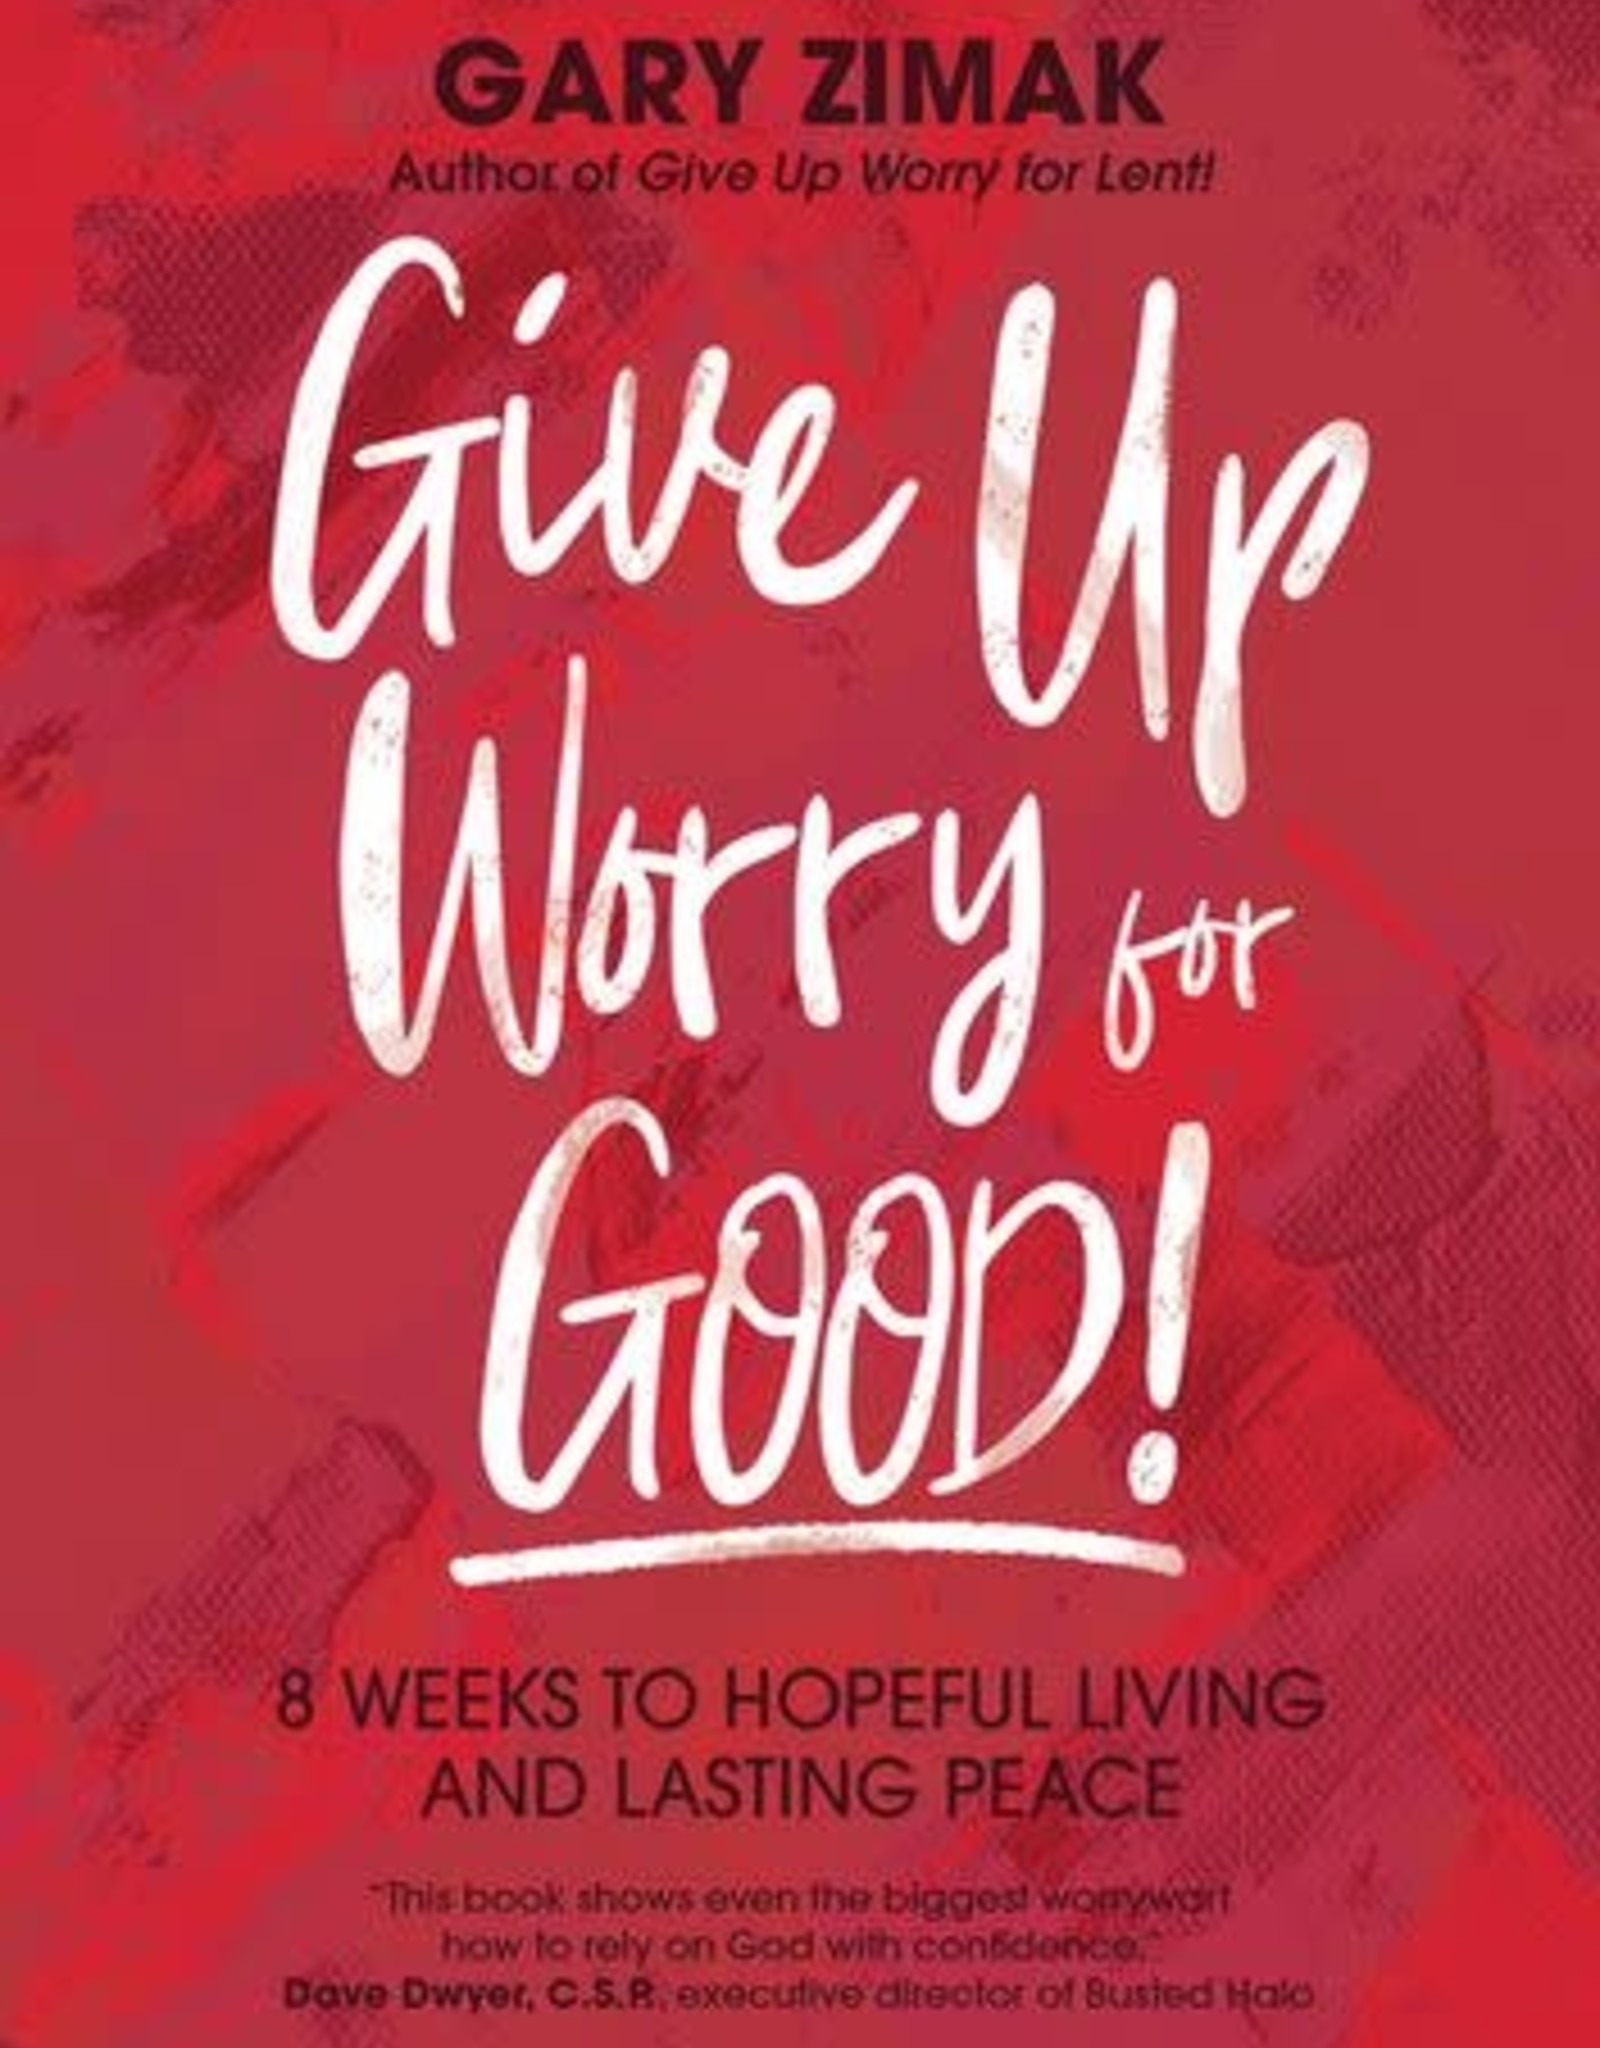 Ave Maria Press Give Up Worry for Good:  8 Weeks to Hopeful Living and Lasting Peace, by Gary Zimak (paperback)